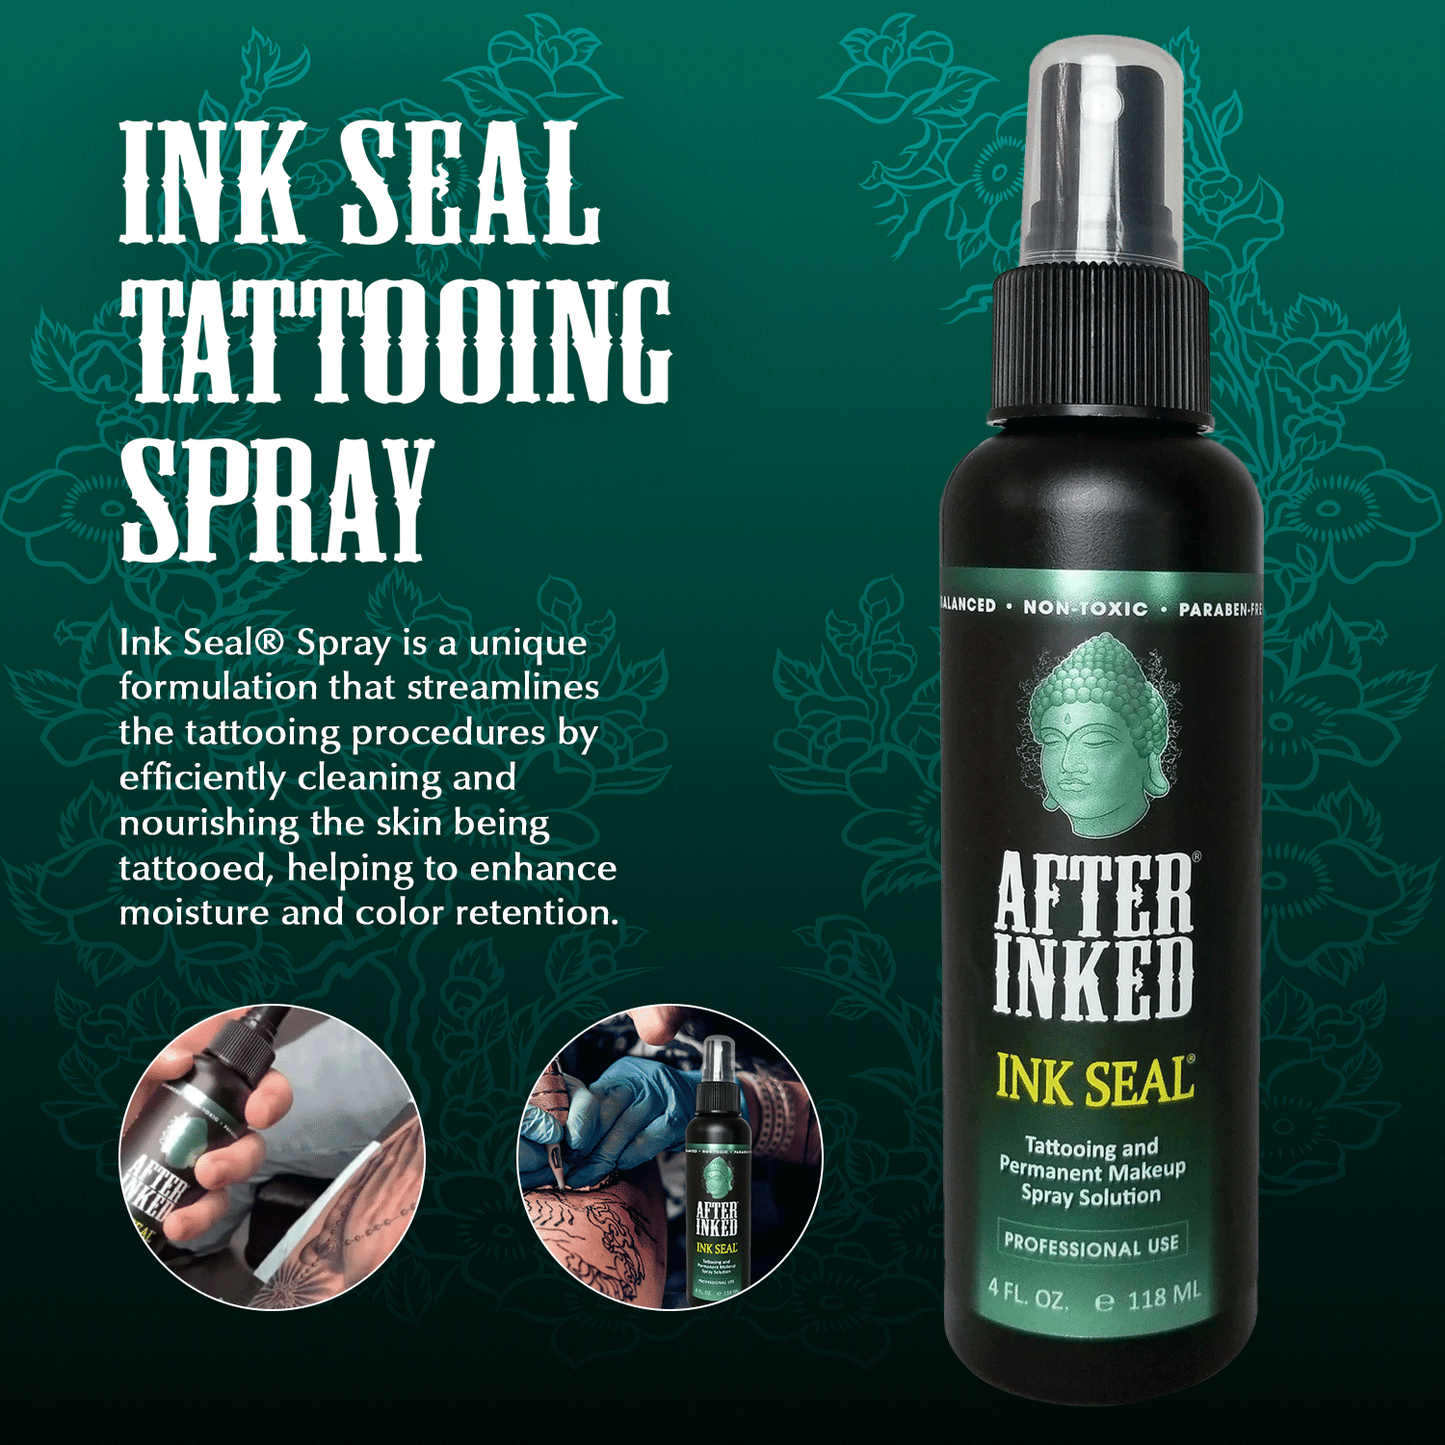 Ink Seal tattooing spray is a unique formulation that streamlines the tattooing procedure by efficiently cleaning and nourishing the skin being tattooed, helping to enhance moisture and color retention.